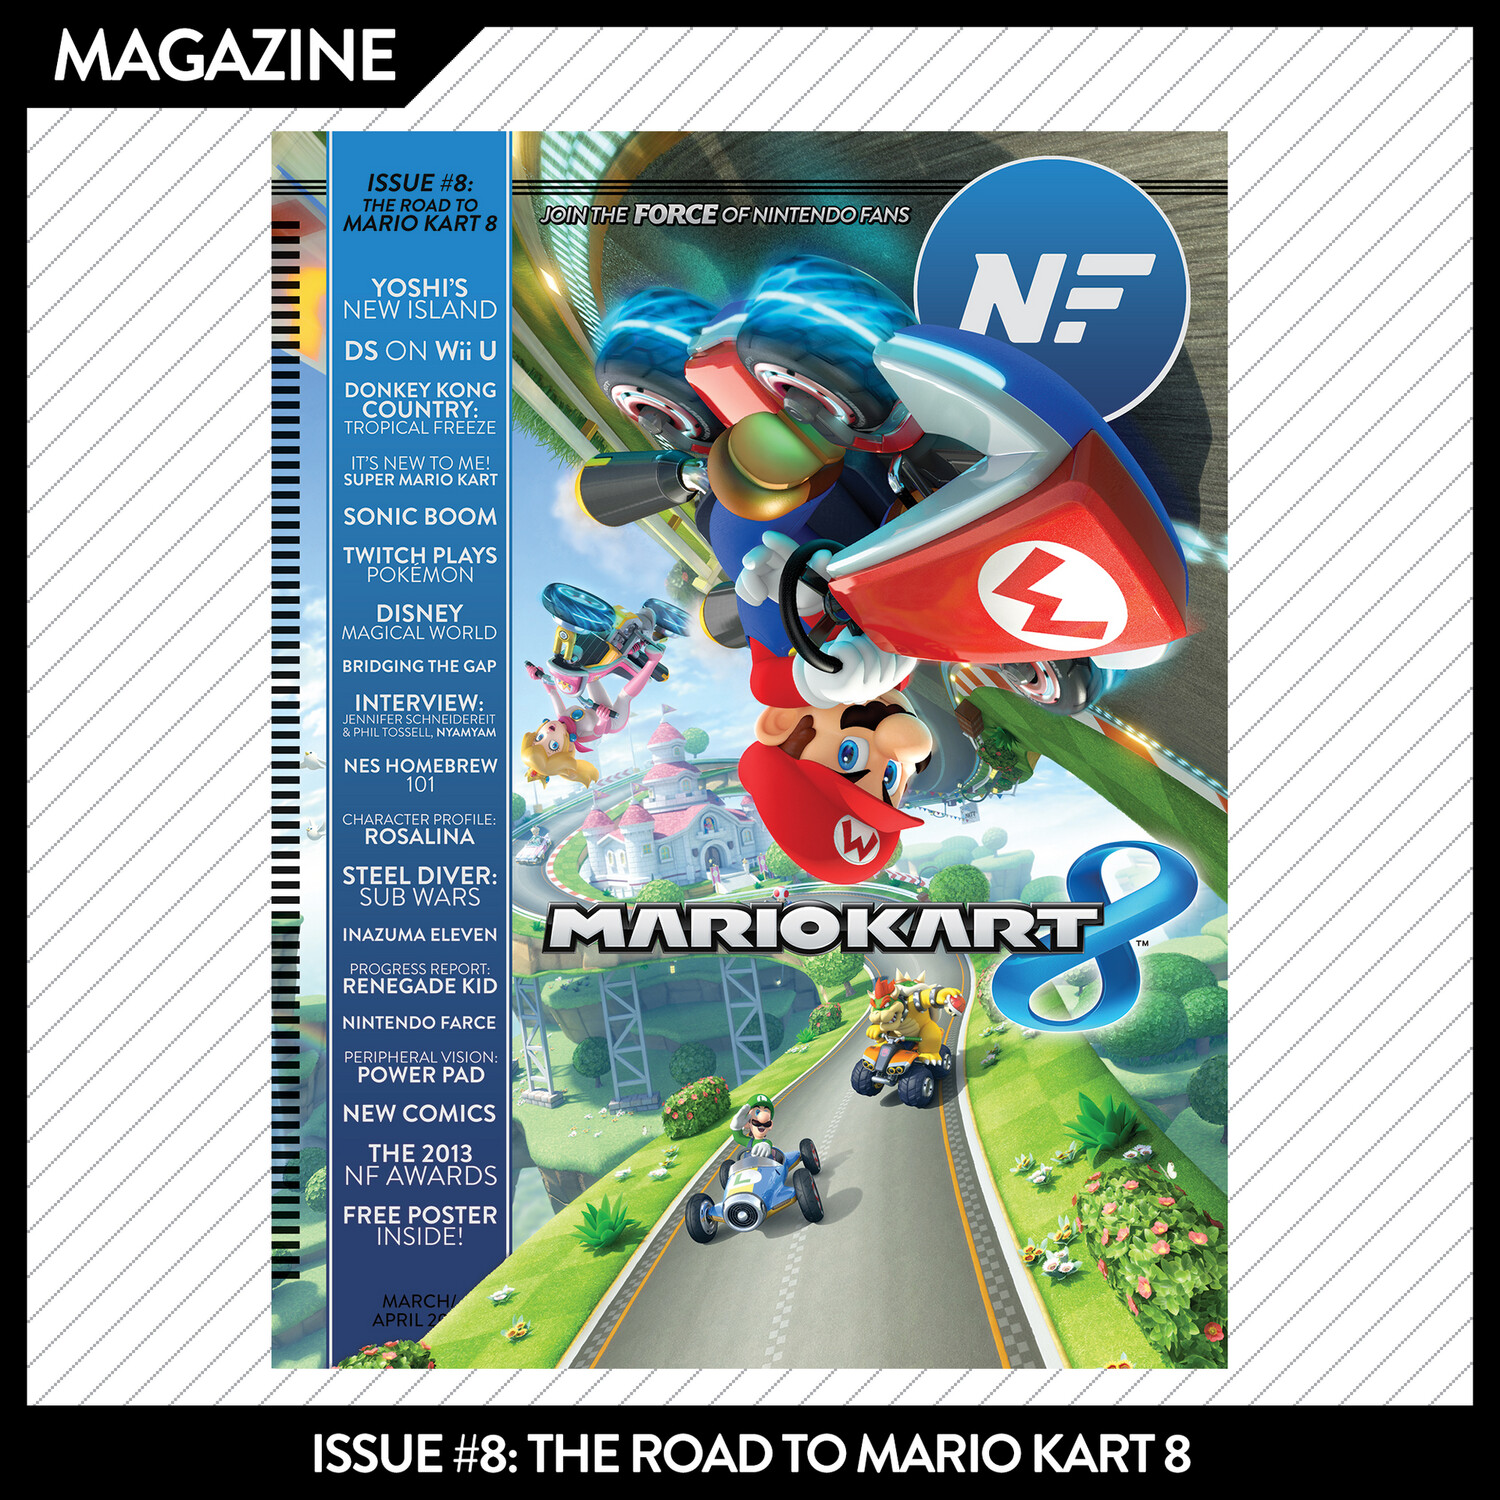 Issue #8: The Road to Mario Kart 8 – March/April 2014